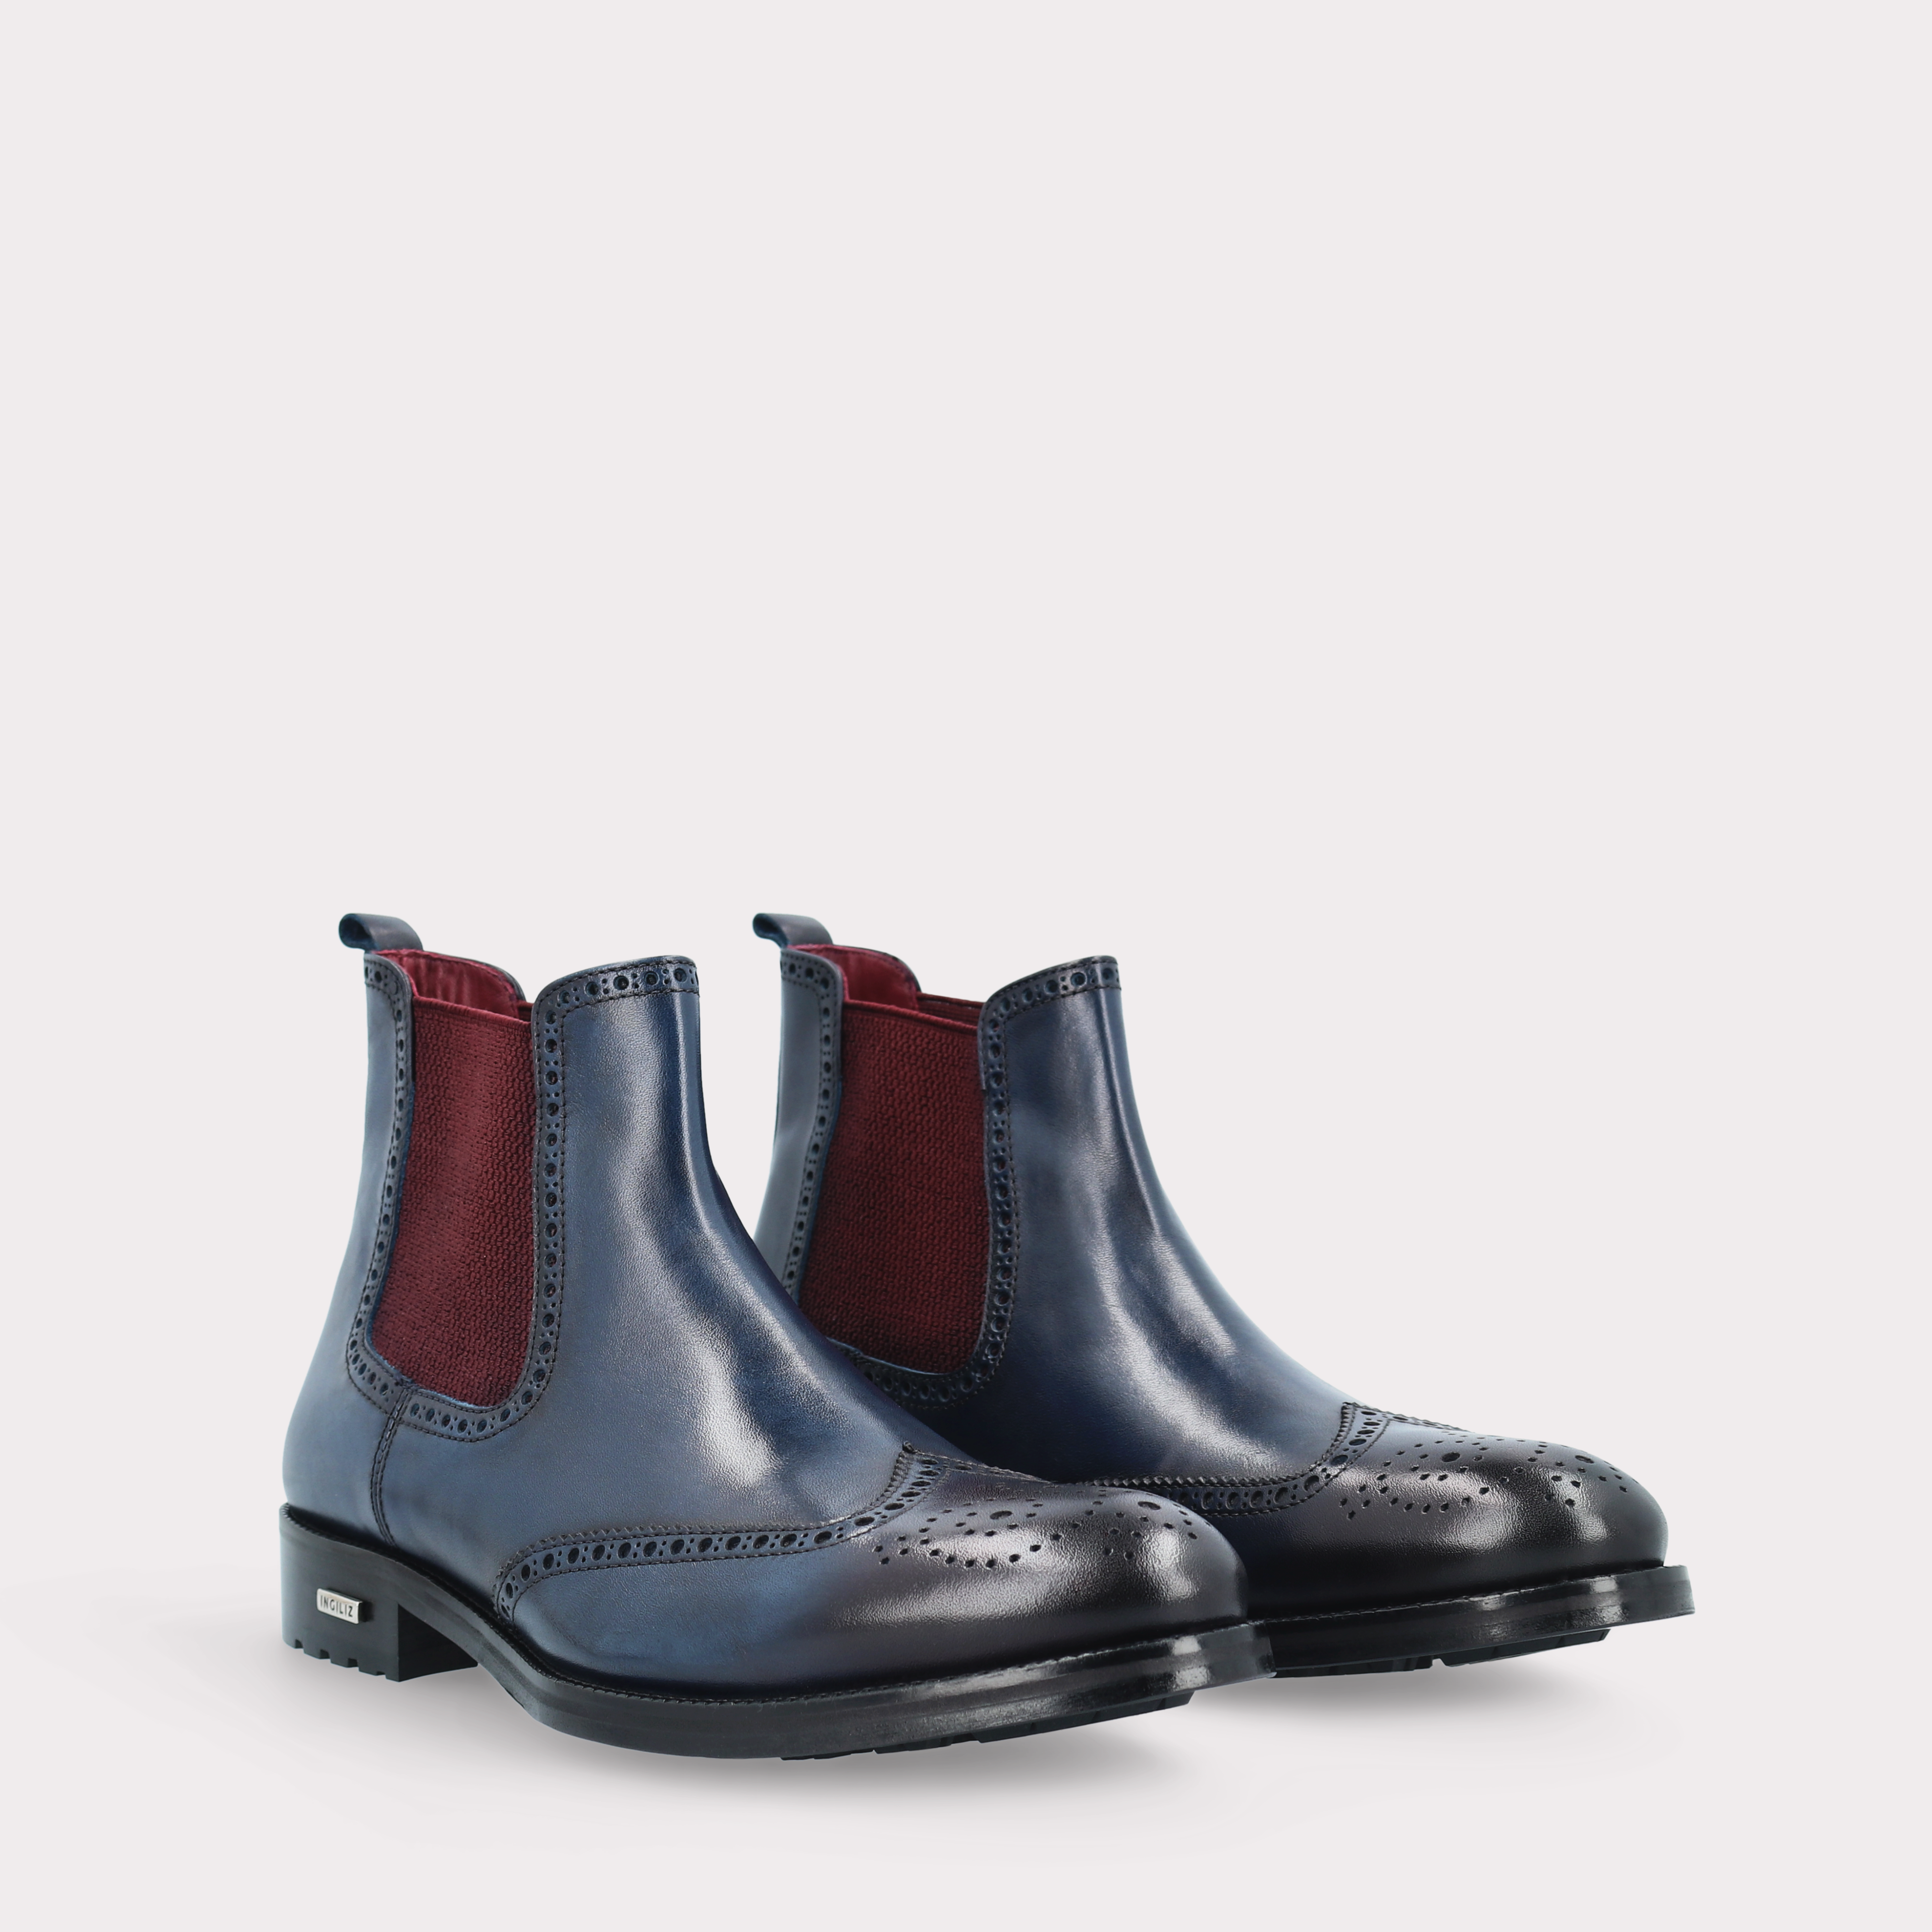 MODENA 01 dark blue leather chelsea boots with bordeaux elastic